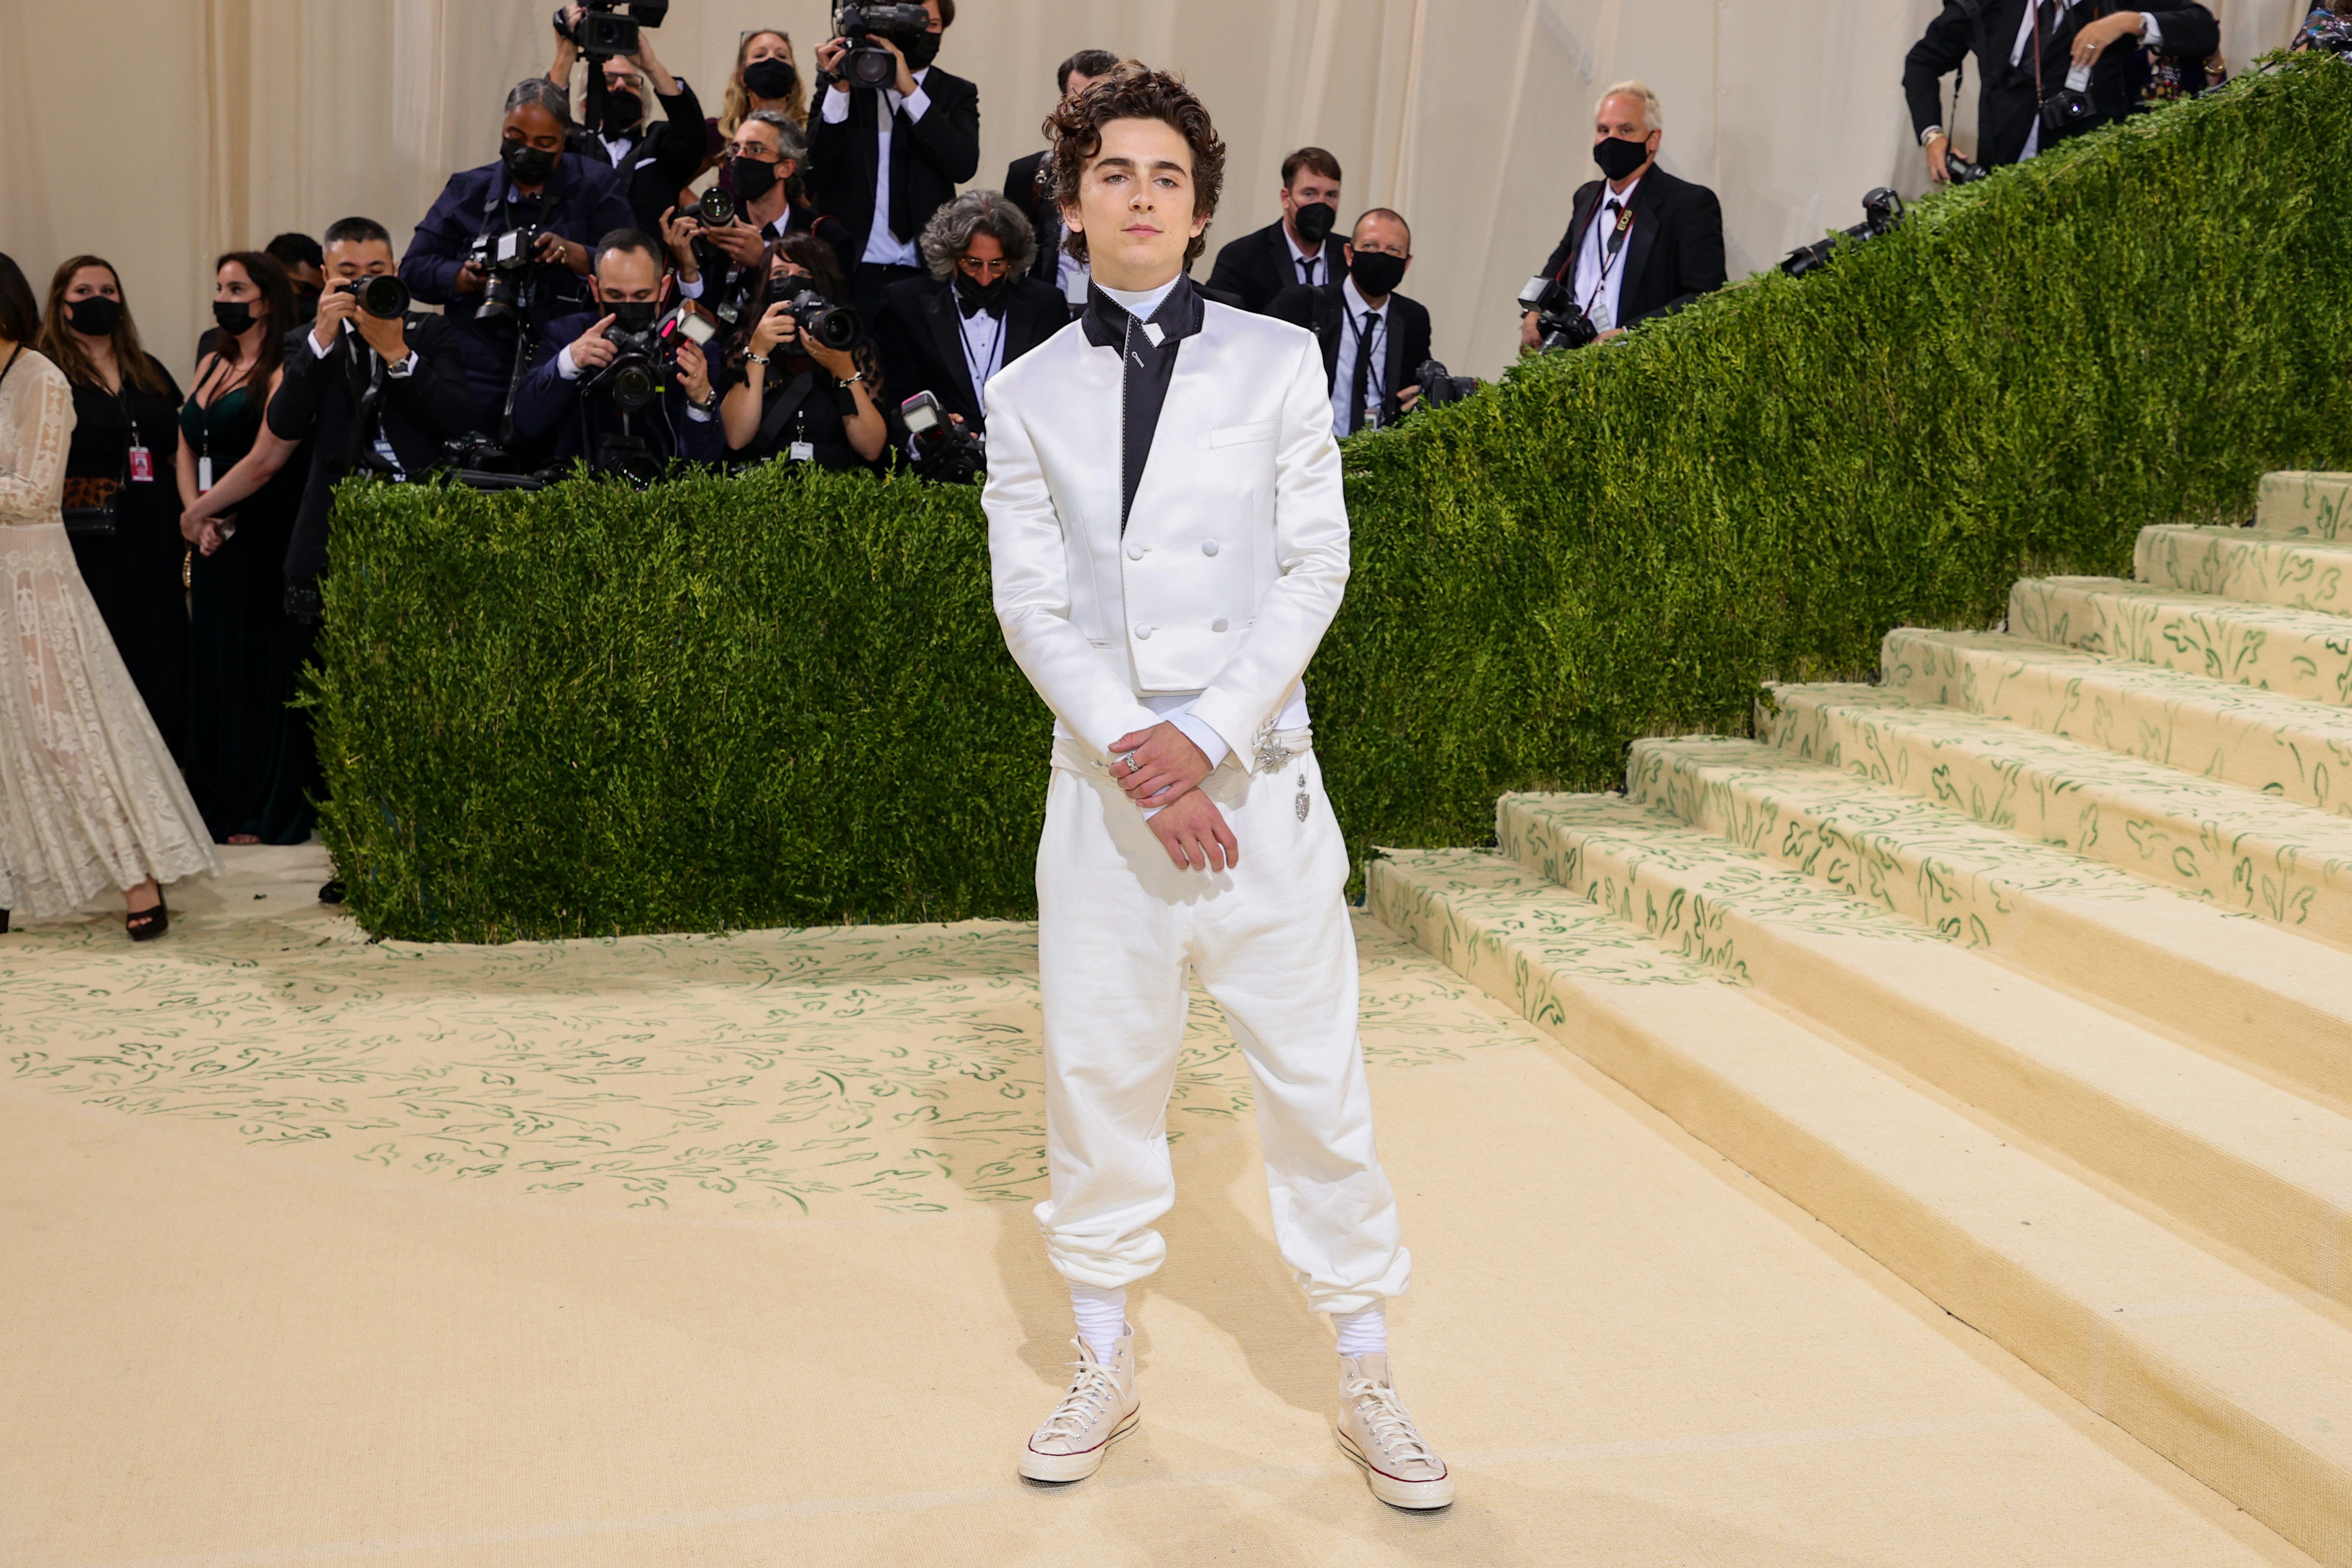 NEW YORK, NEW YORK - SEPTEMBER 13: Co-chair Timothée Chalamet attends The 2021 Met Gala Celebrating In America: A Lexicon Of Fashion at Metropolitan Museum of Art on September 13, 2021 in New York City. (Photo by Theo Wargo/Getty Images) (Foto: Getty Images)